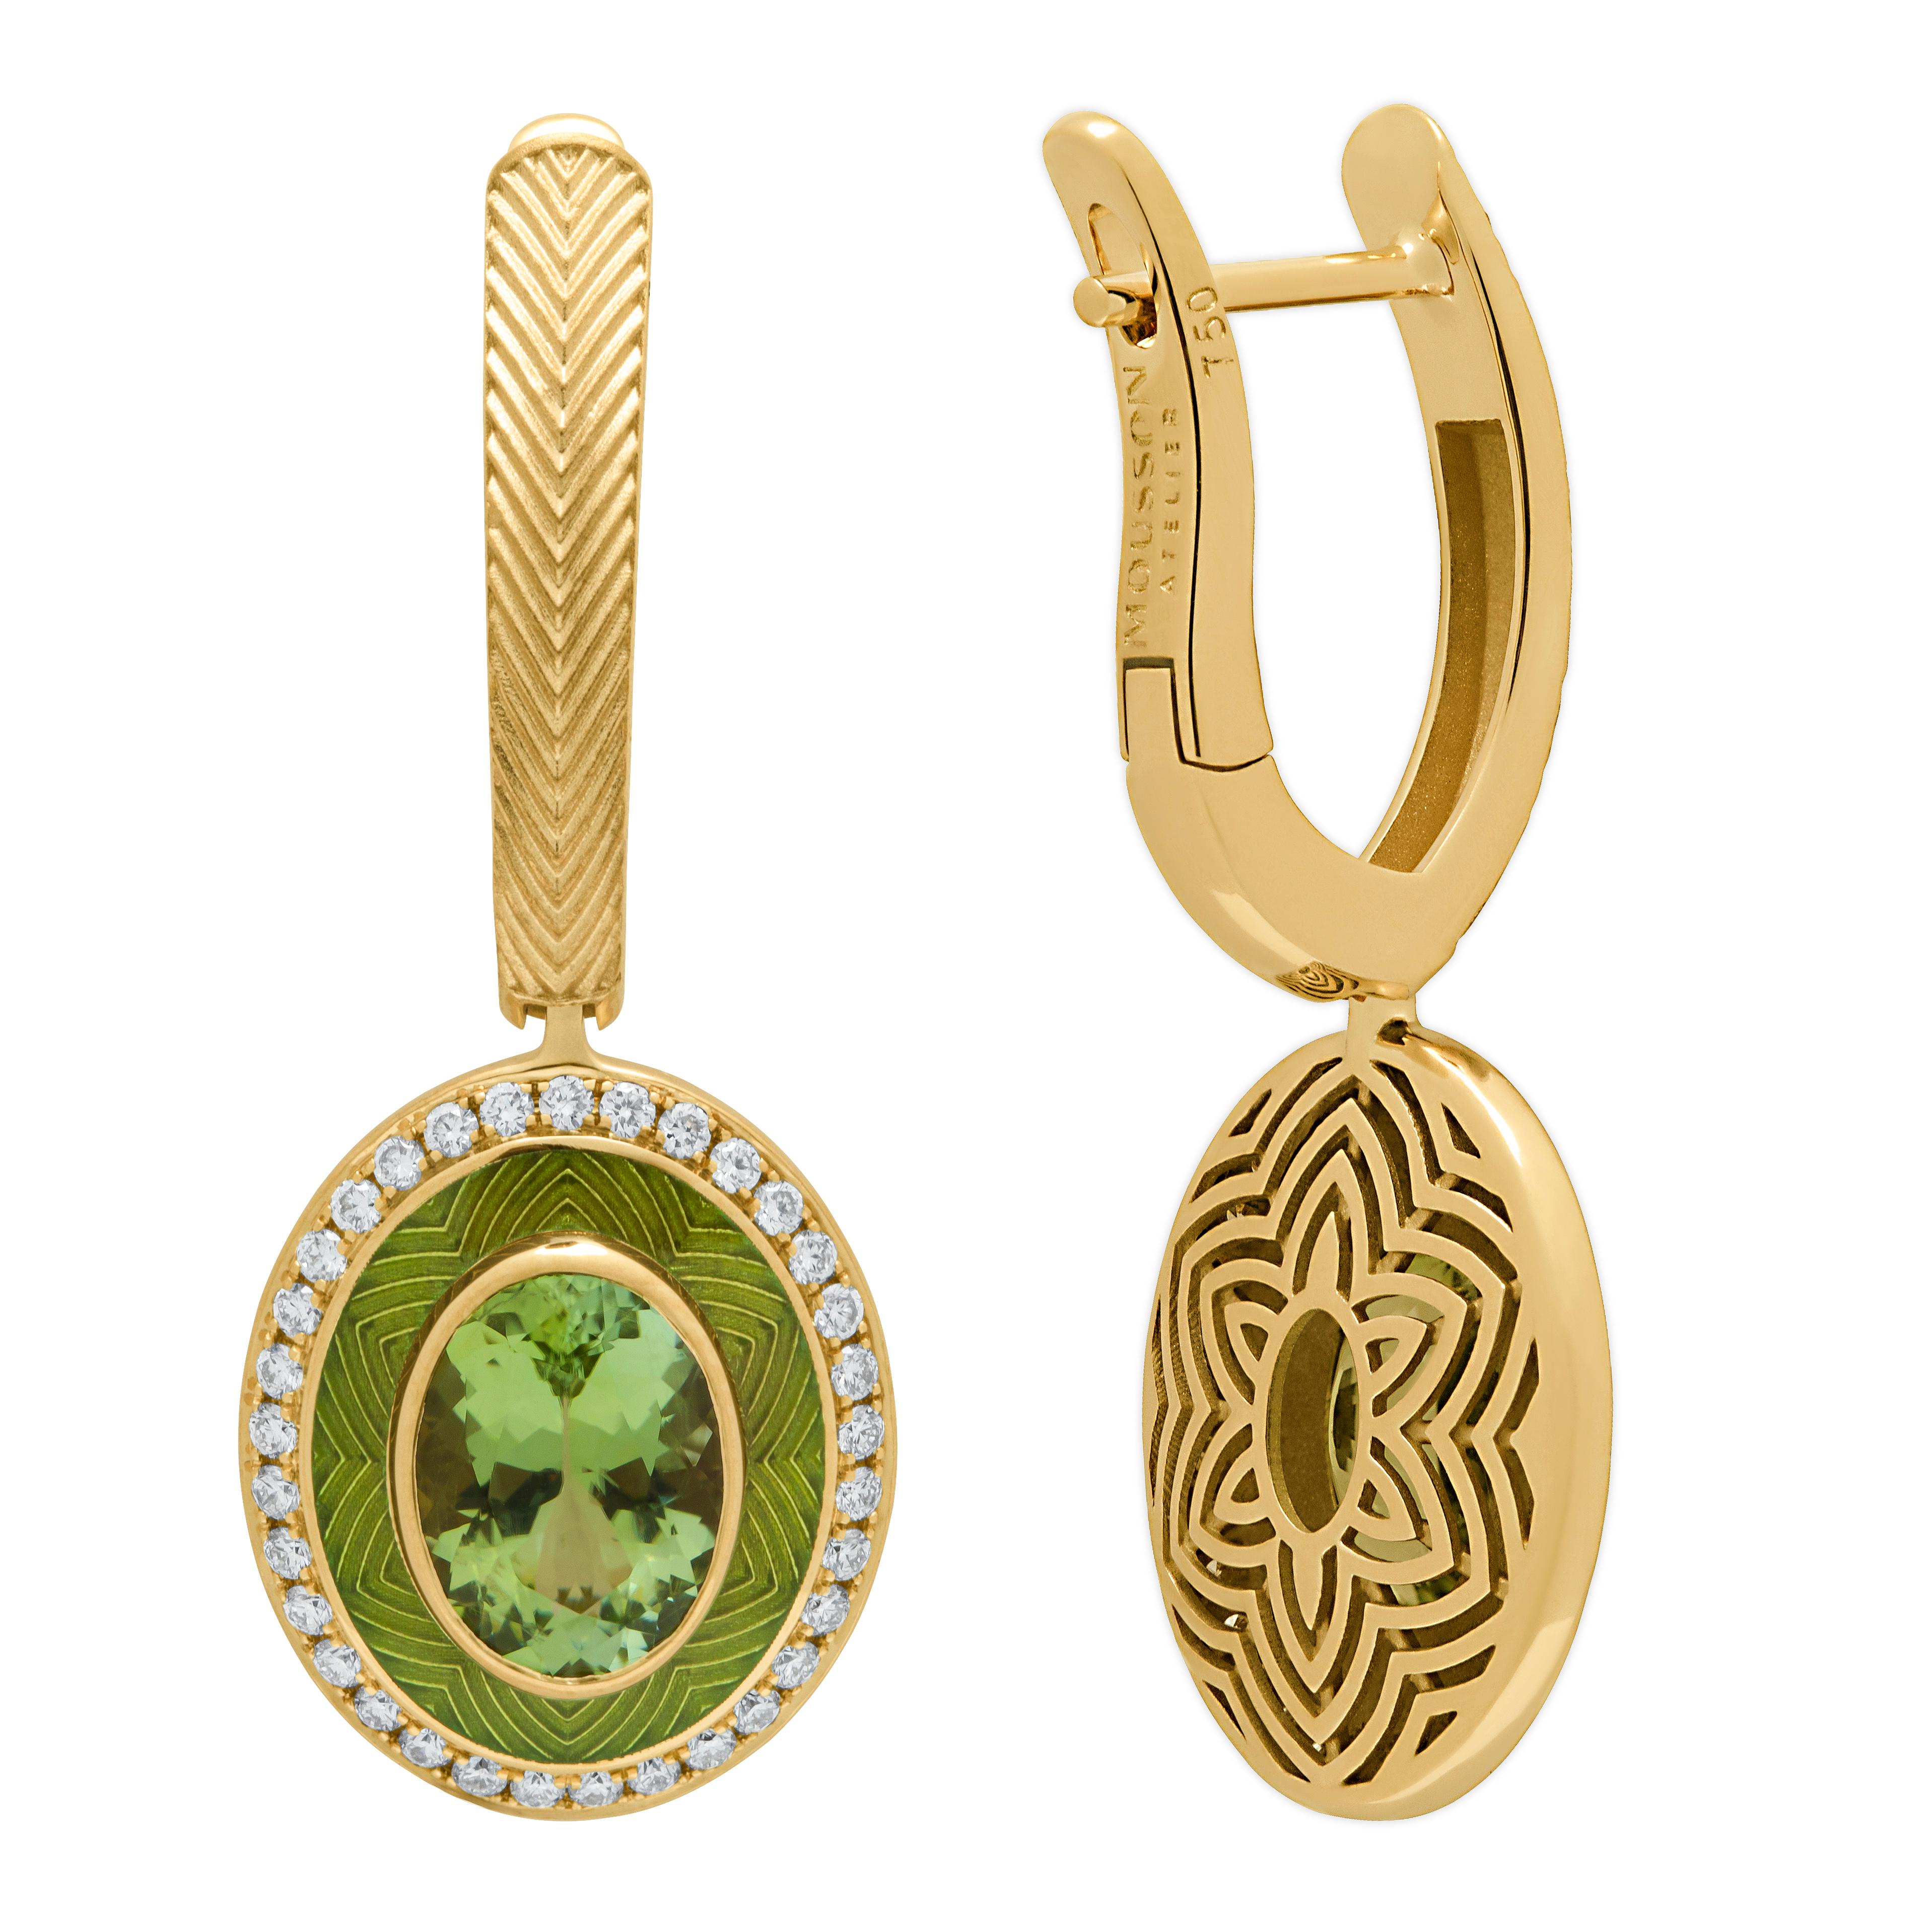 Green Tourmaline 2.40 Carat Diamonds Enamel 18 Karat Yellow Gold Tweed Earrings

Perhaps this is the brightest and most popular representative of the Pret-a-Porter collection. The texture of Tweed reminds of the well-known fabric, but most